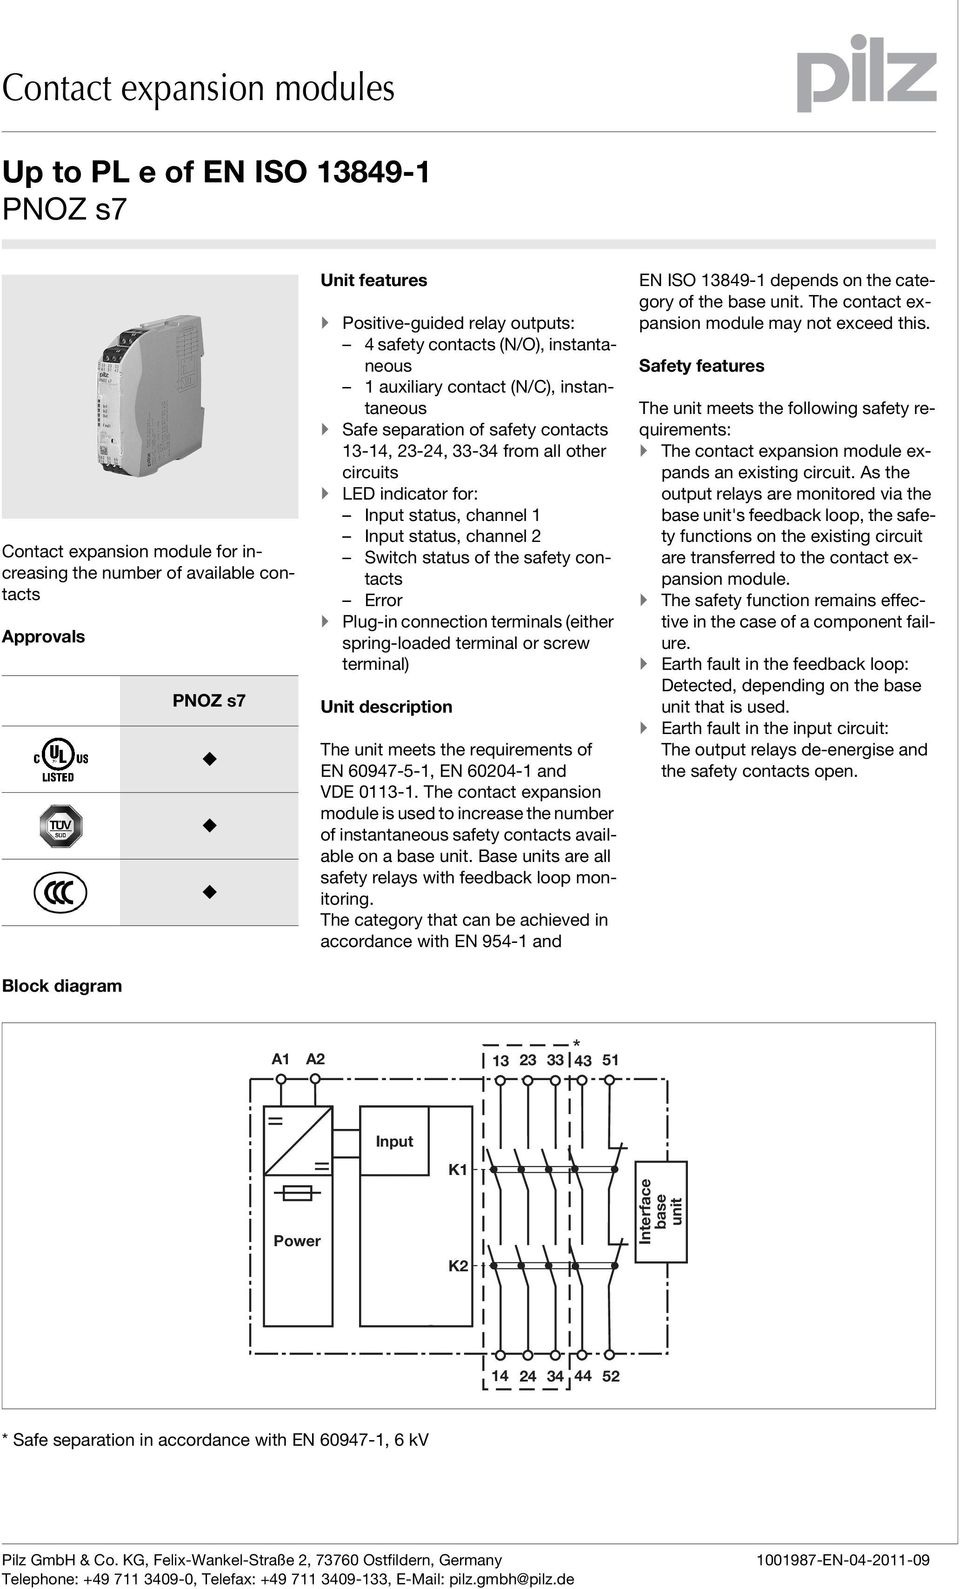 status, channel 2 Switch status of the safety contacts Error Plug-in connection terminals (either spring-loaded terminal or screw terminal) Unit description Bestimmung/Gertebeschreibung